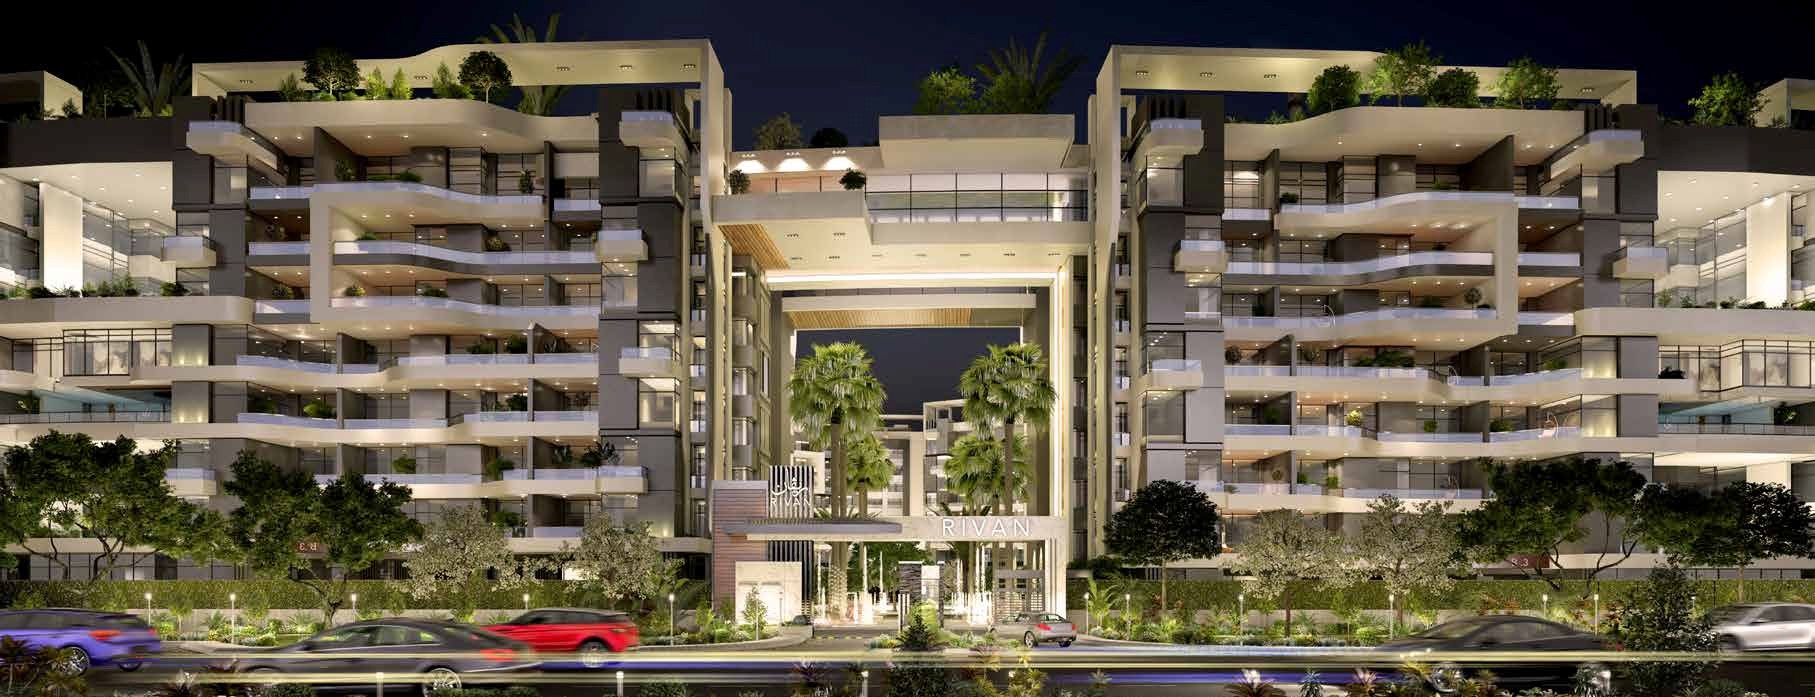 With an area of 219 m², apartments for sale in Rivan Capital